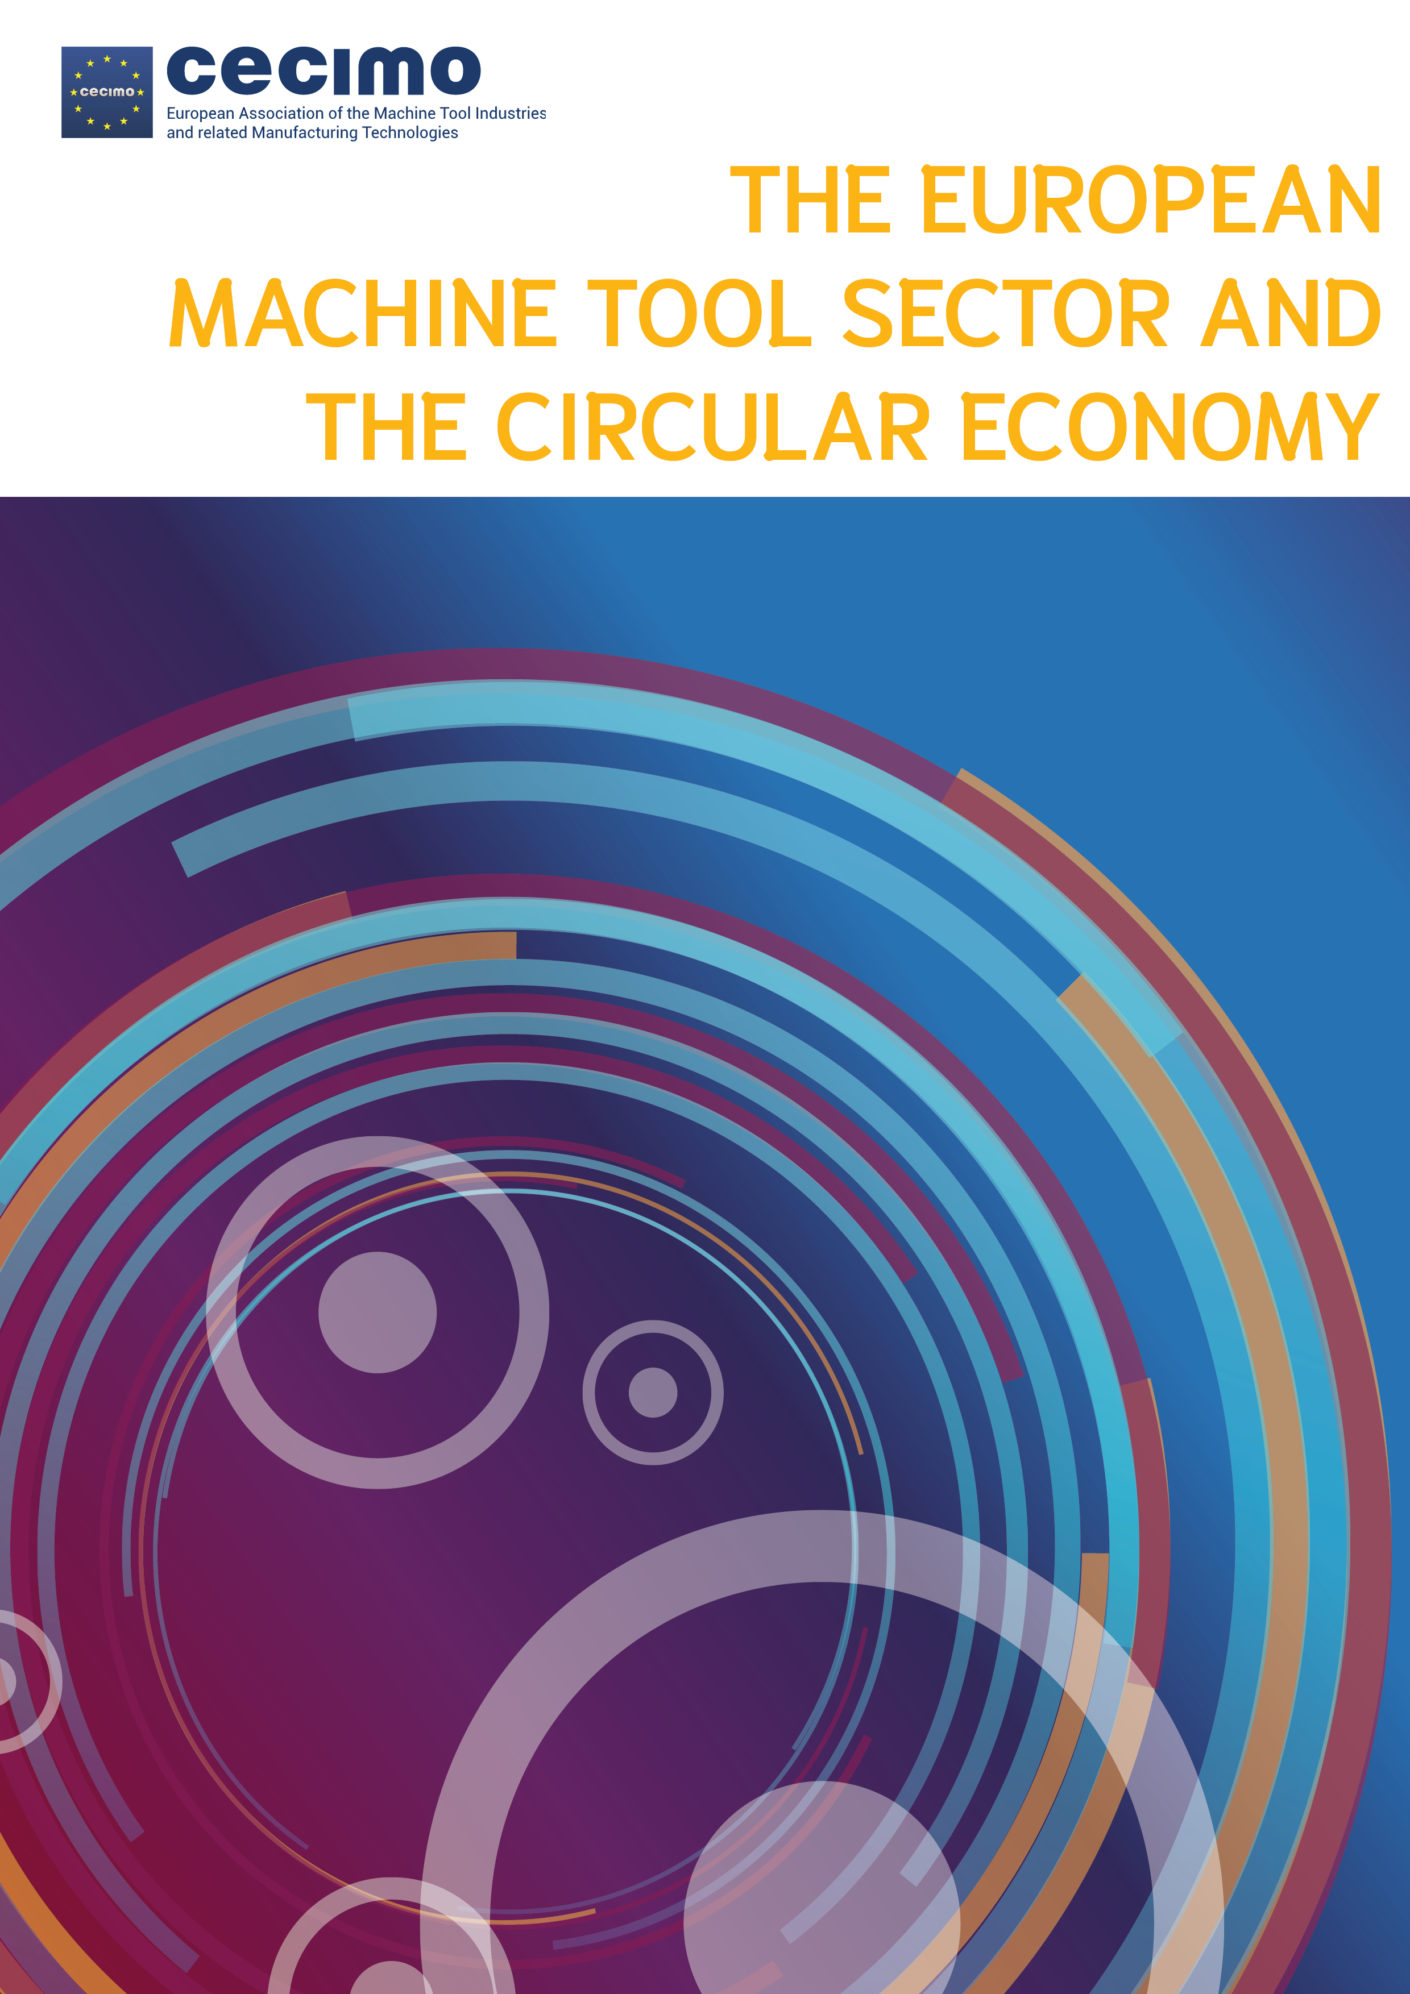 CECIMO Report on “The European Machine Tool Sector and the Circular Economy”